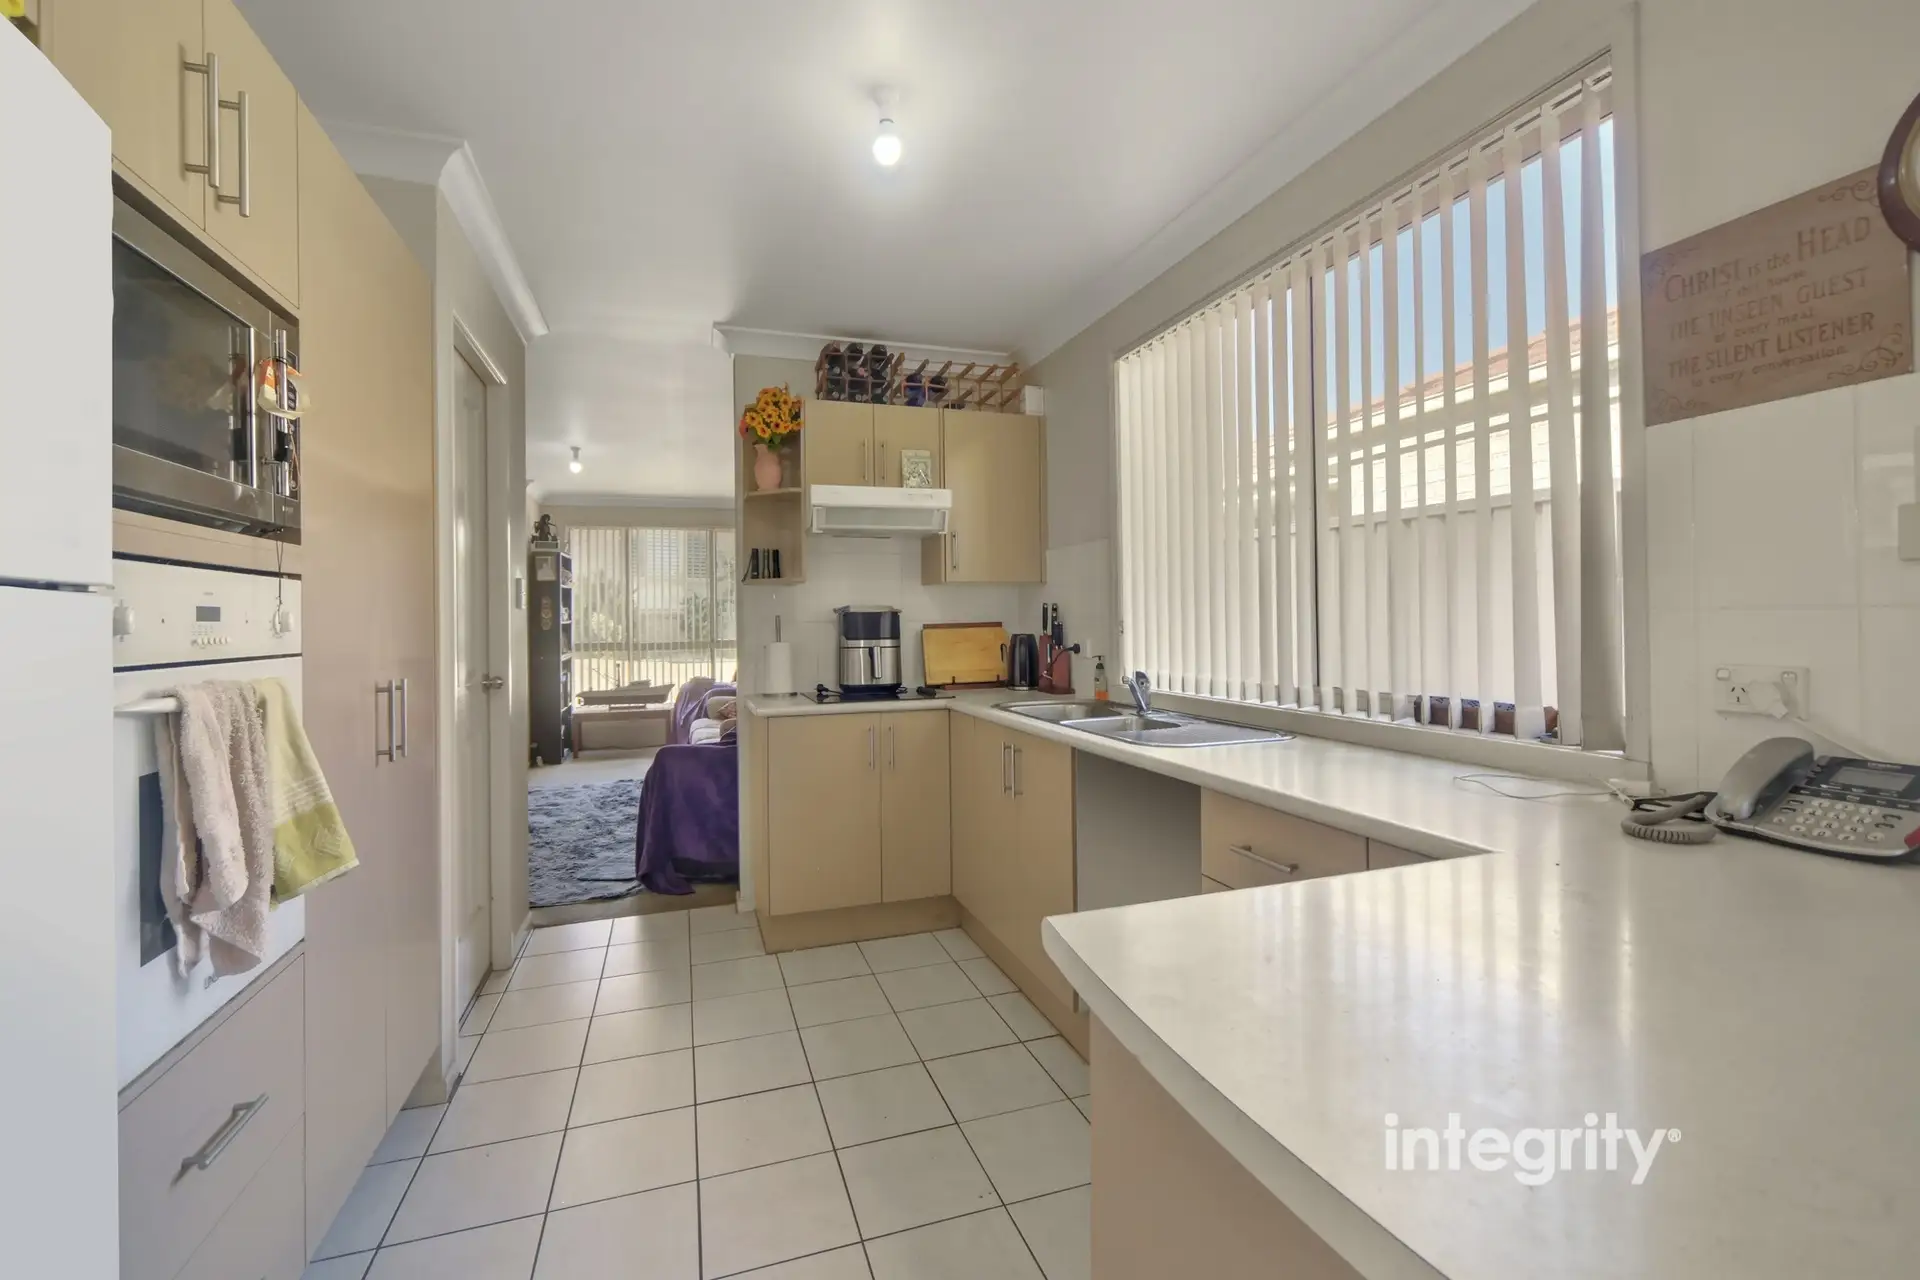 2/73-75 Rayleigh Drive, Worrigee For Sale by Integrity Real Estate - image 3